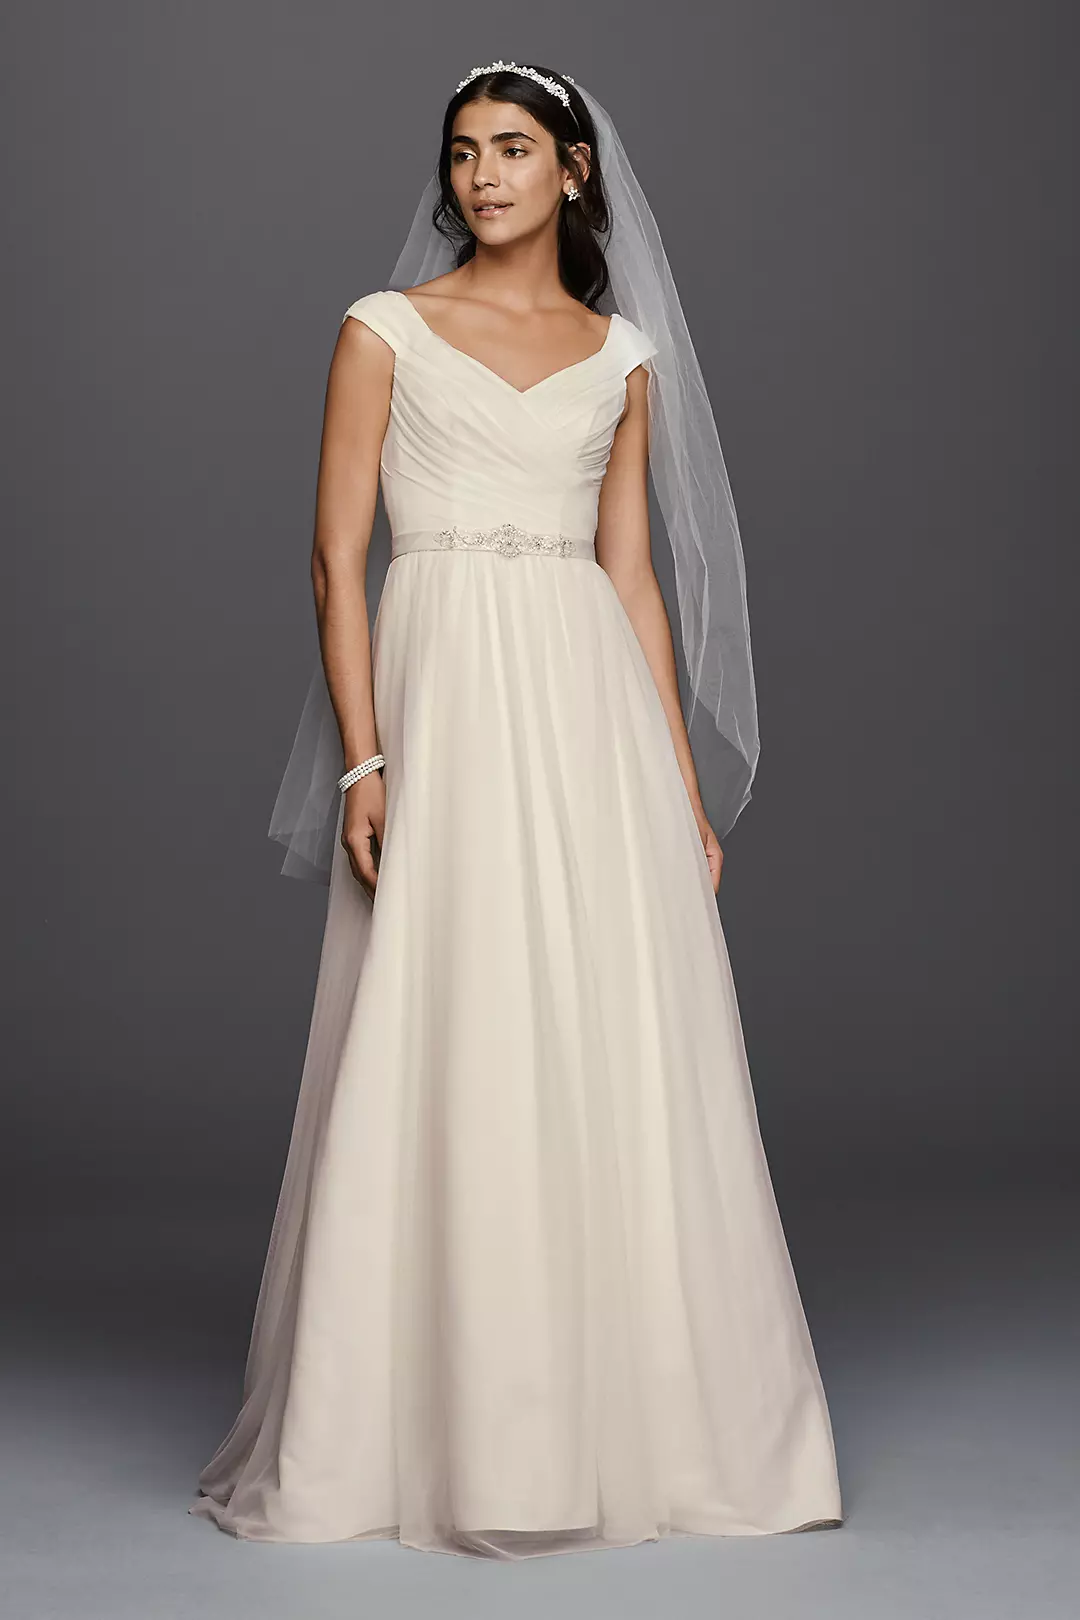 Tulle A-line Wedding Dress with Beaded Sash  Image